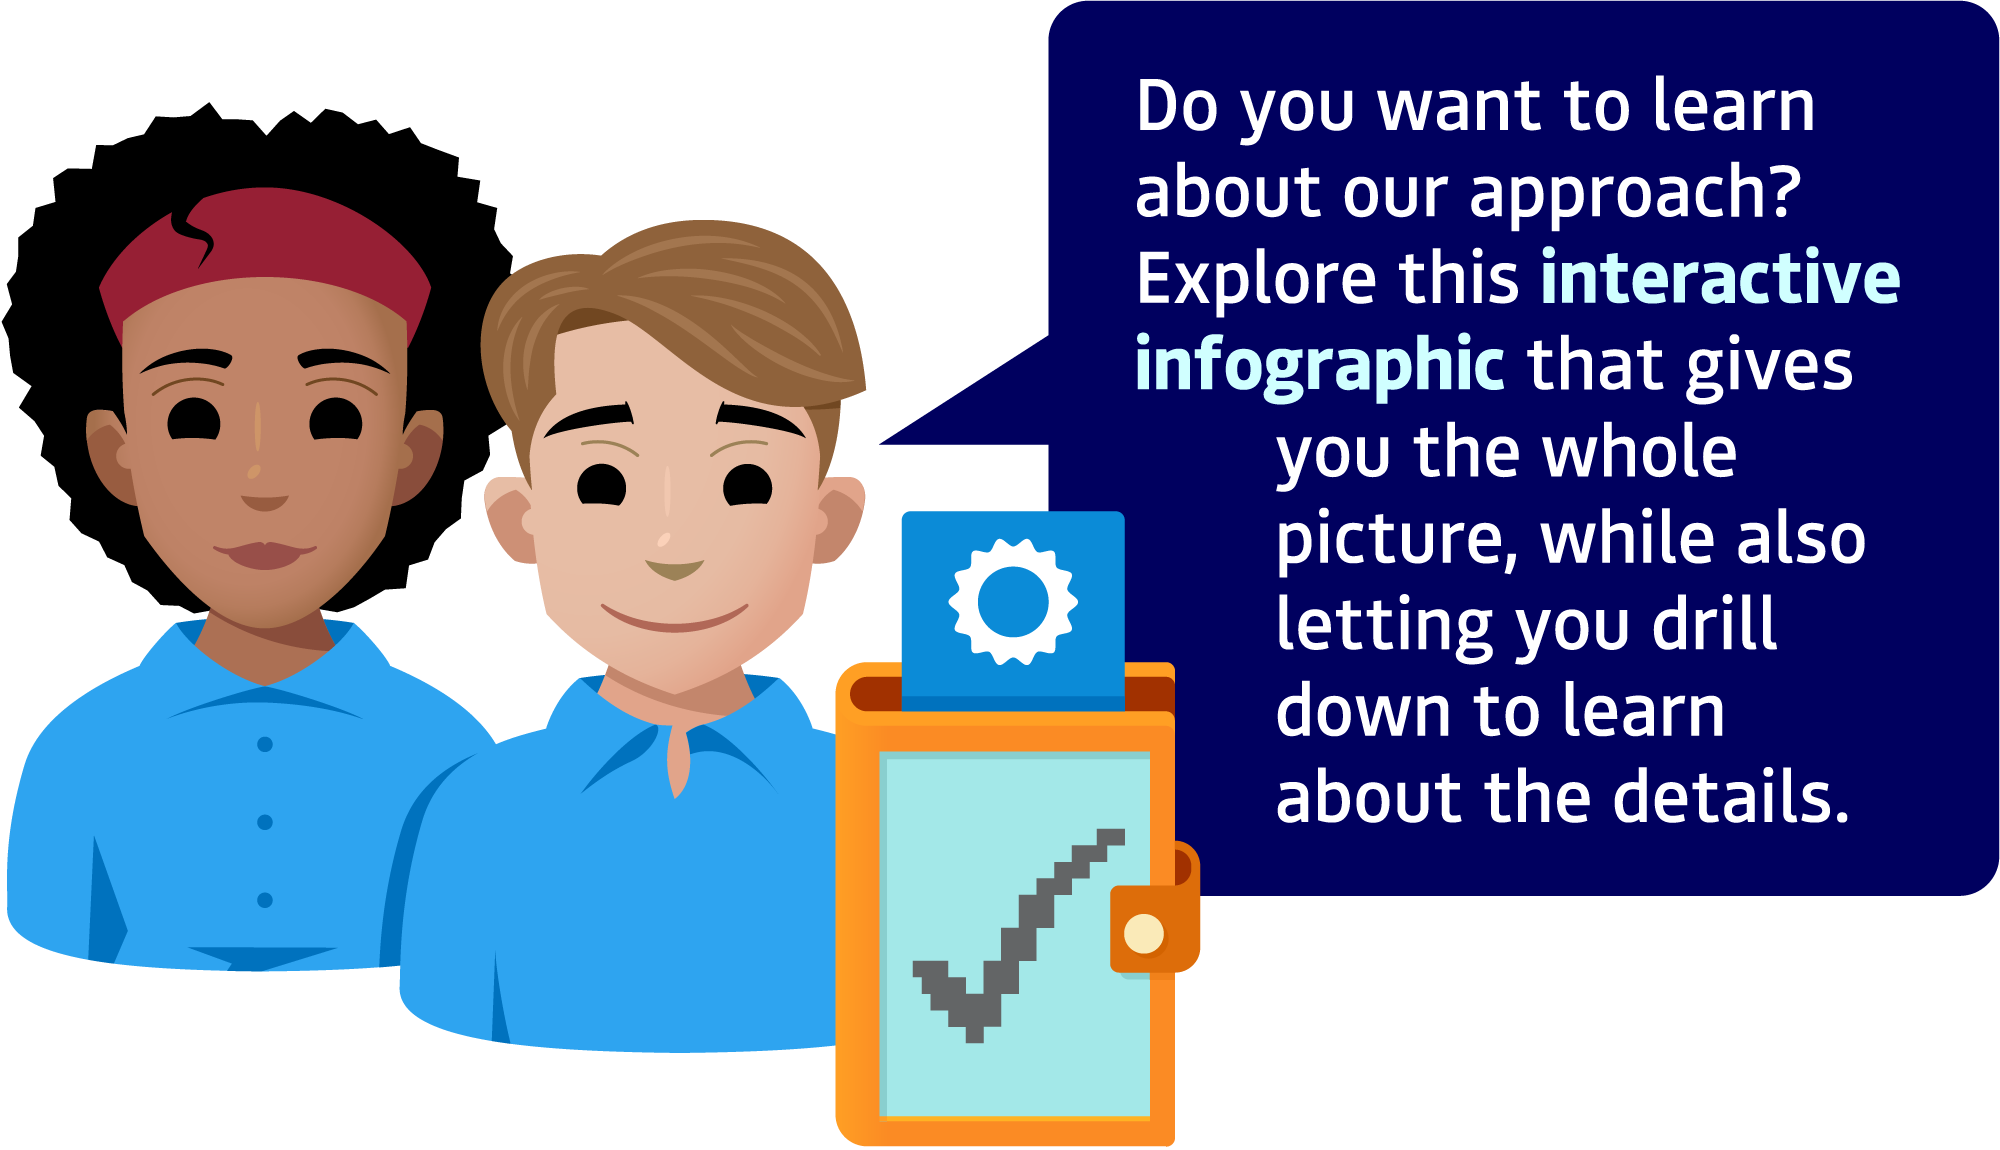 Do you want to learn about our approach? Explore this interactive infographic that gives you the whole picture, while also letting you drill down to learn about the details.